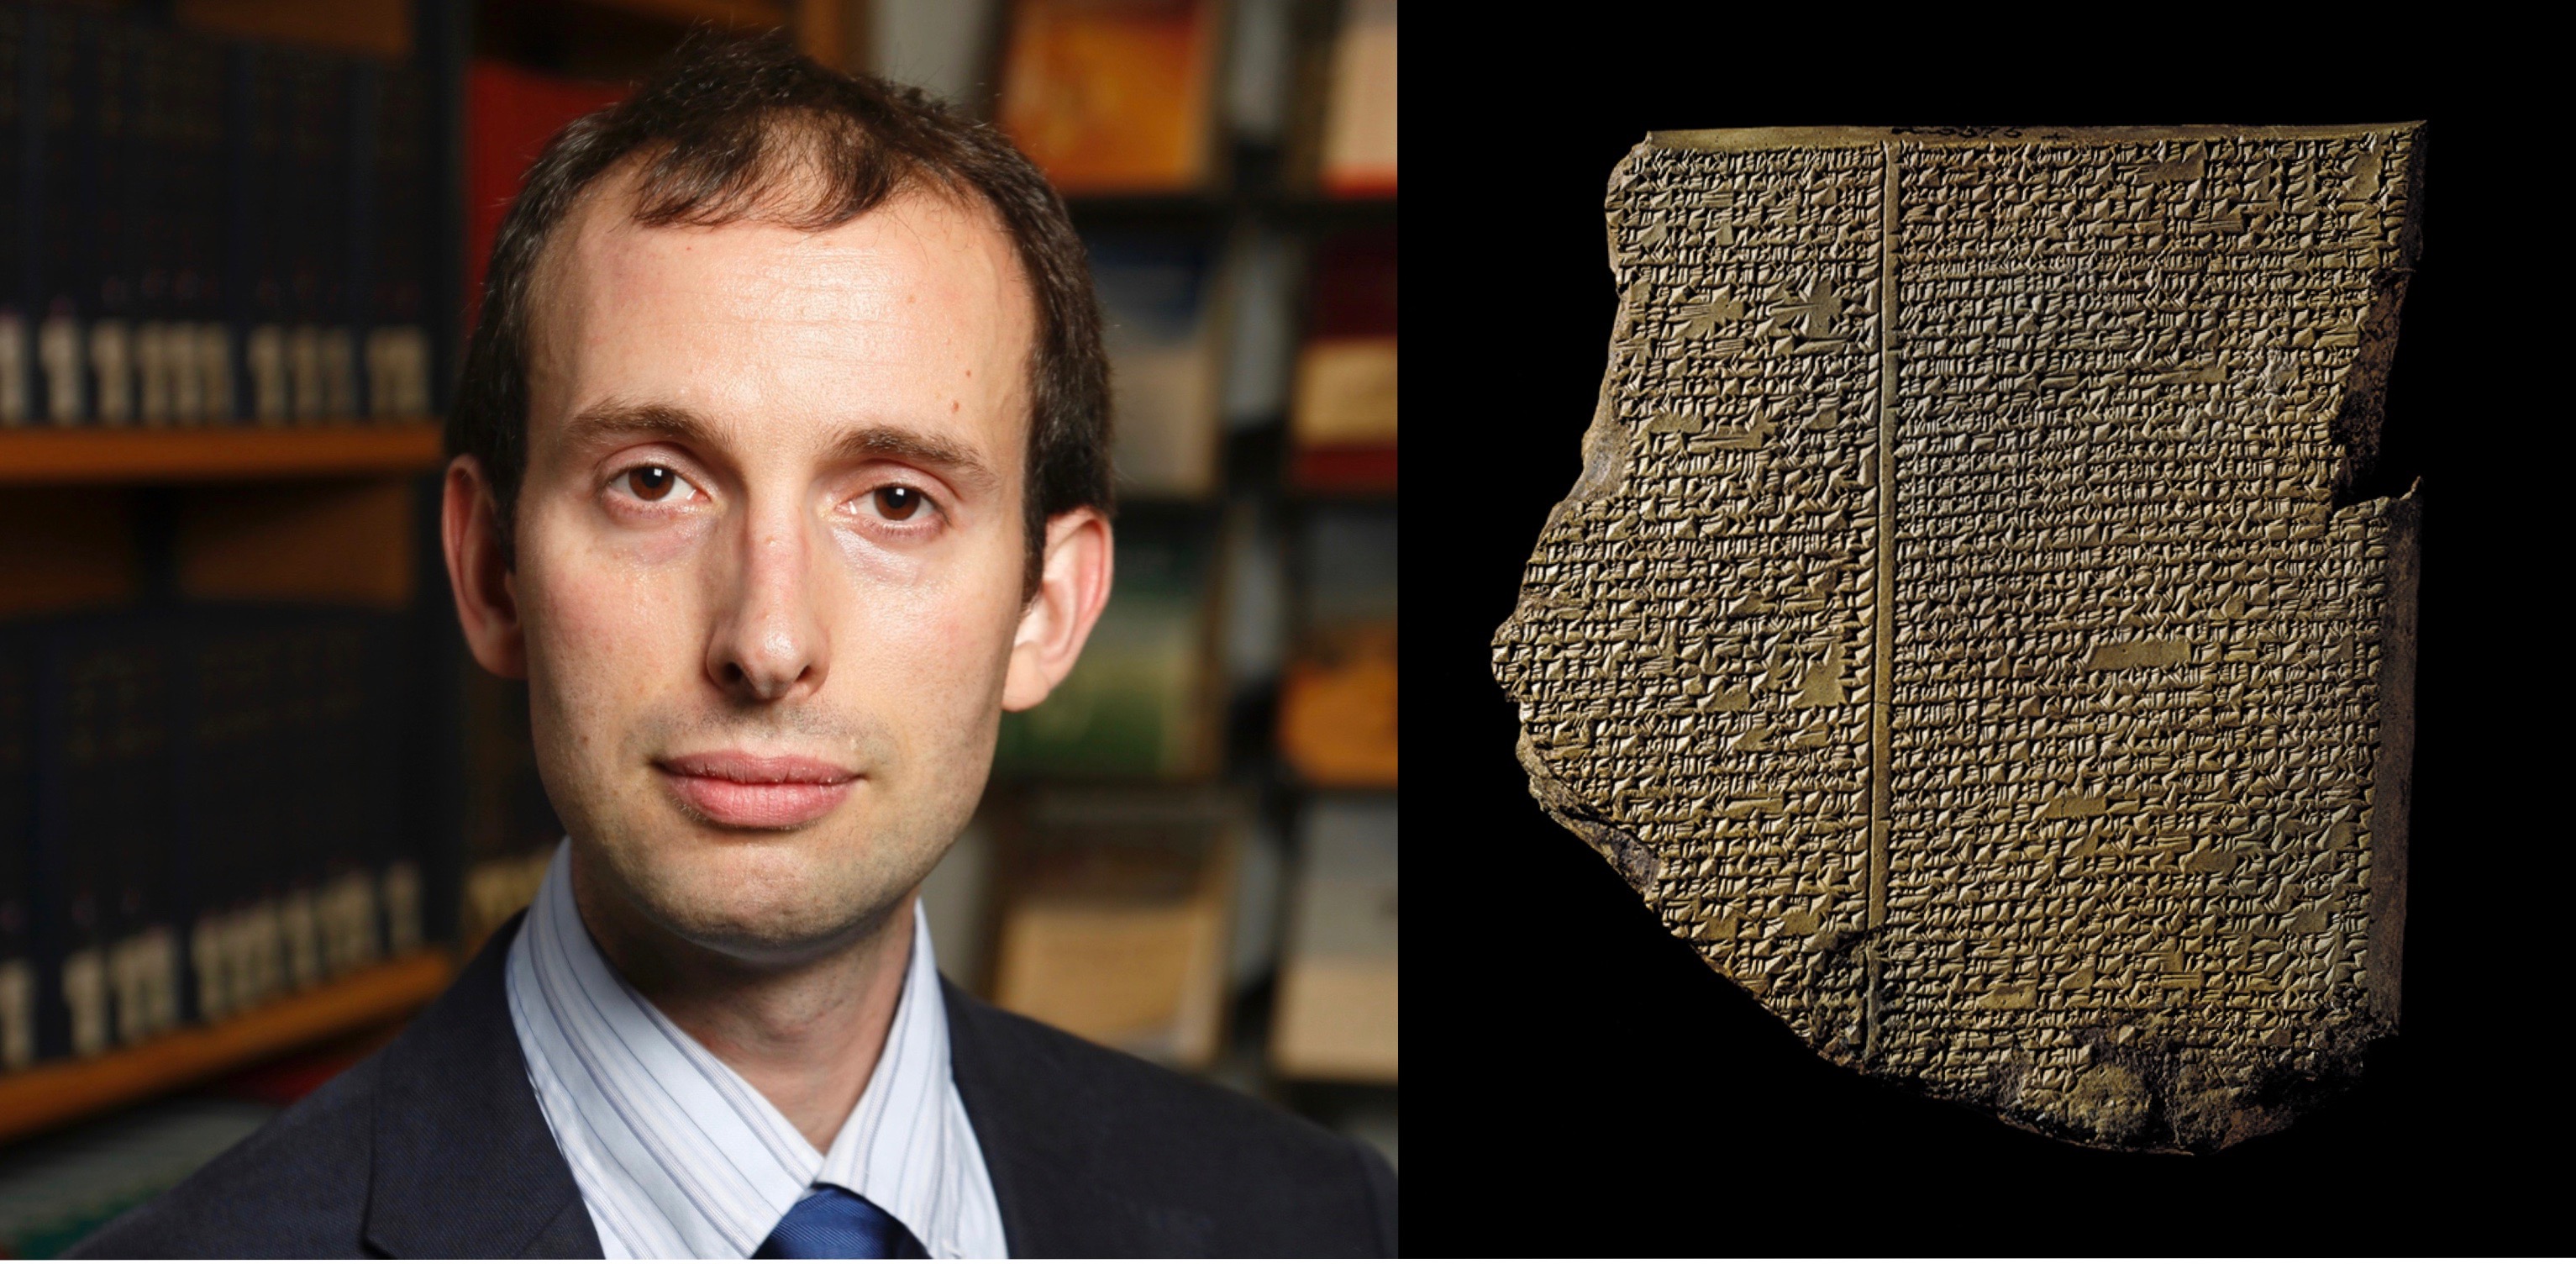 Martin Worthington with Above: The Flood Tablet. Top: The Adda Seal featuring the god Ea second from the right. Credit: The Trustees of the British Museum.